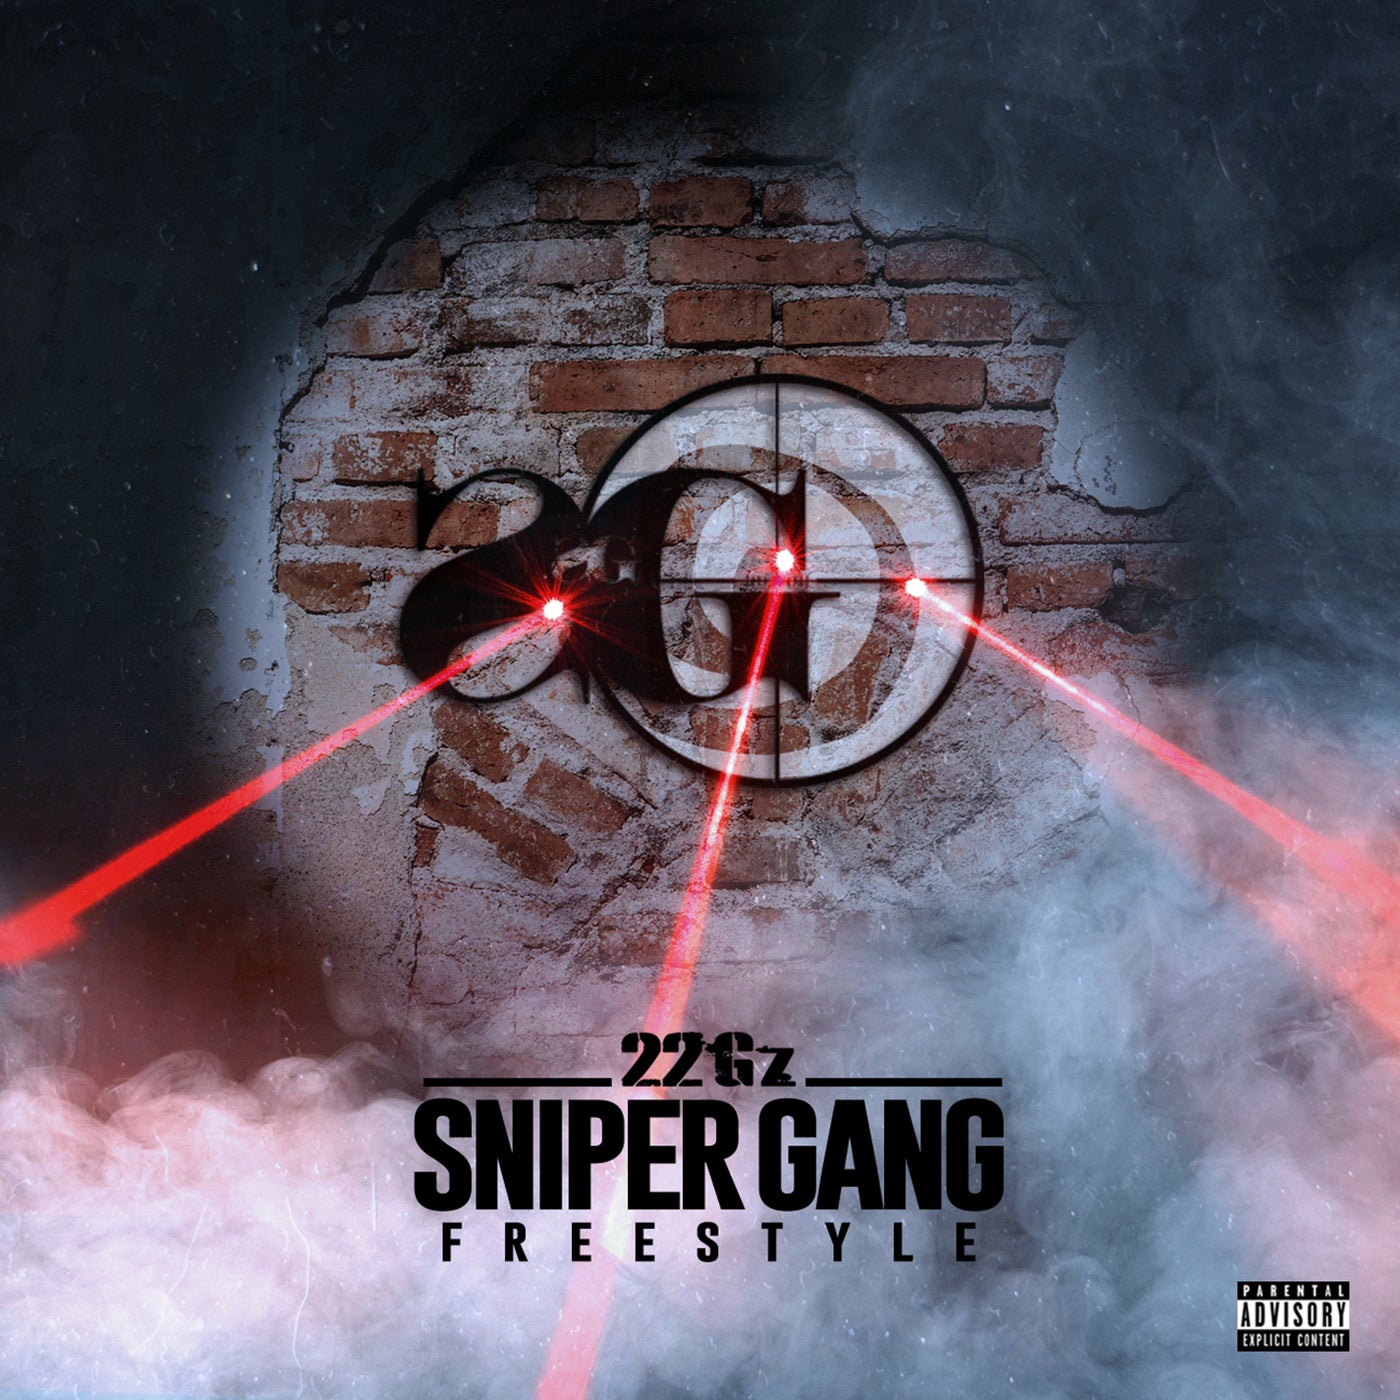 Sniper Gang Freestyle by 22Gz on Beatsource